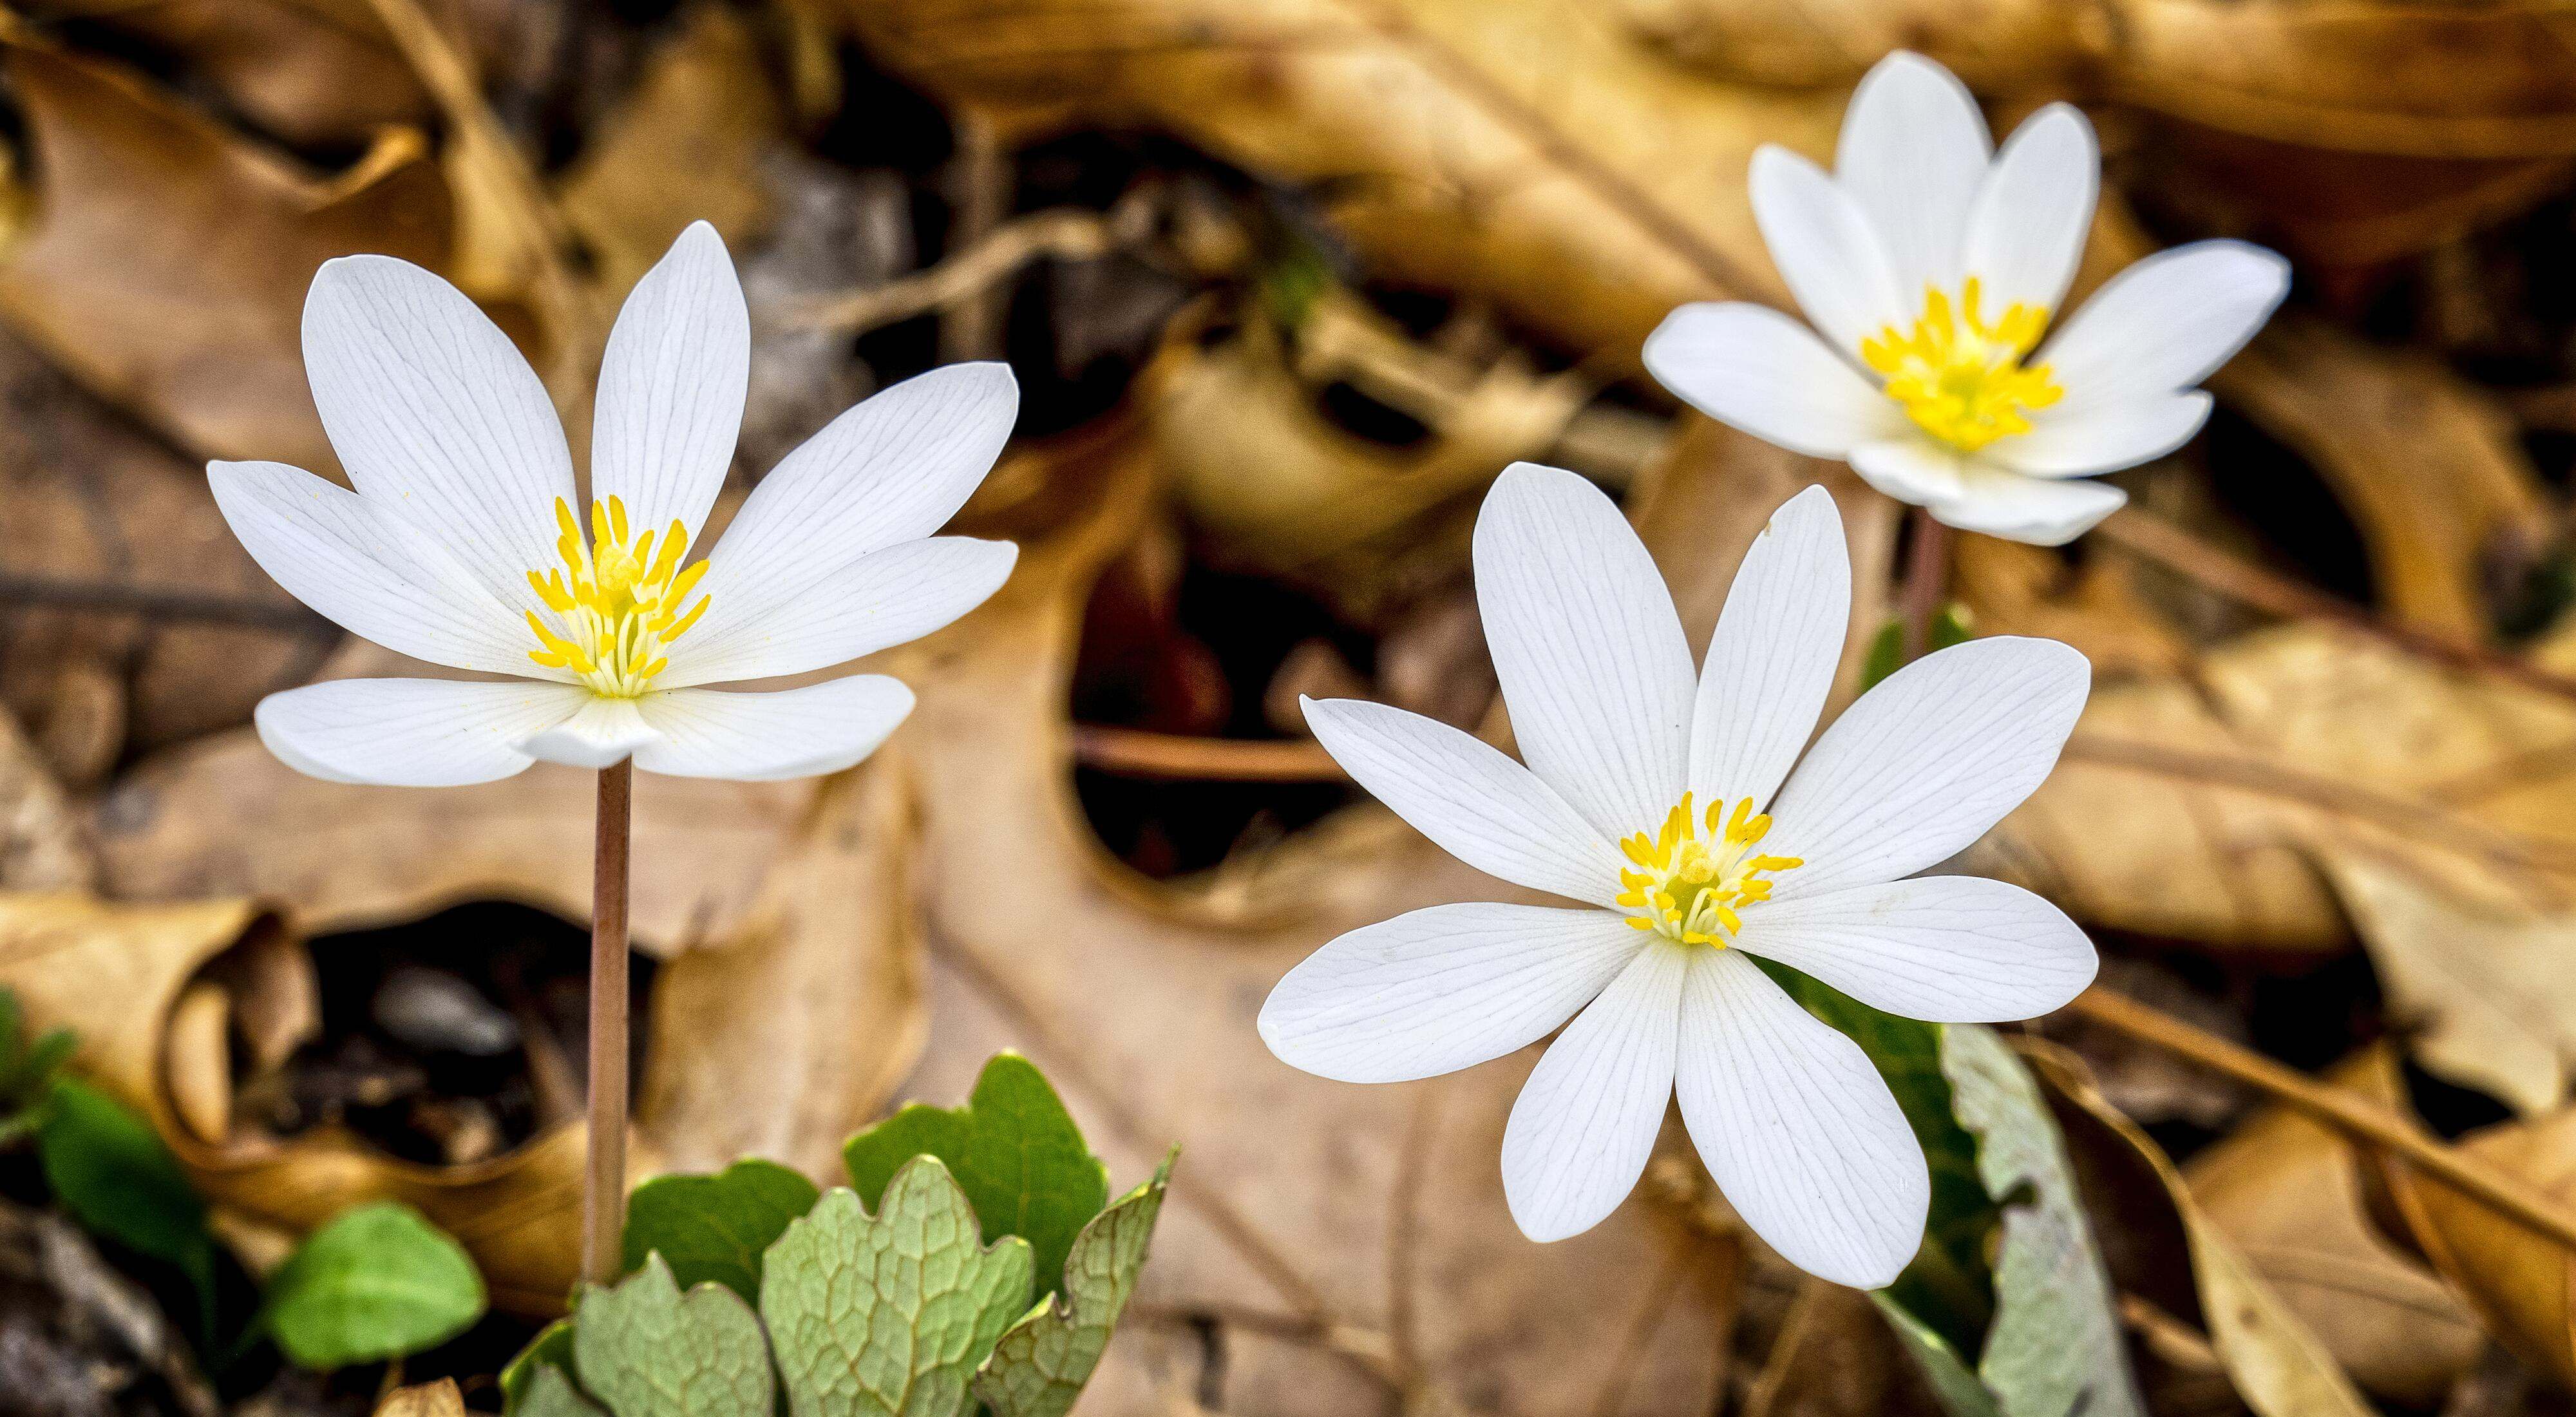 Small white flowers with yellow in their center emerge from a leafy forest floor.